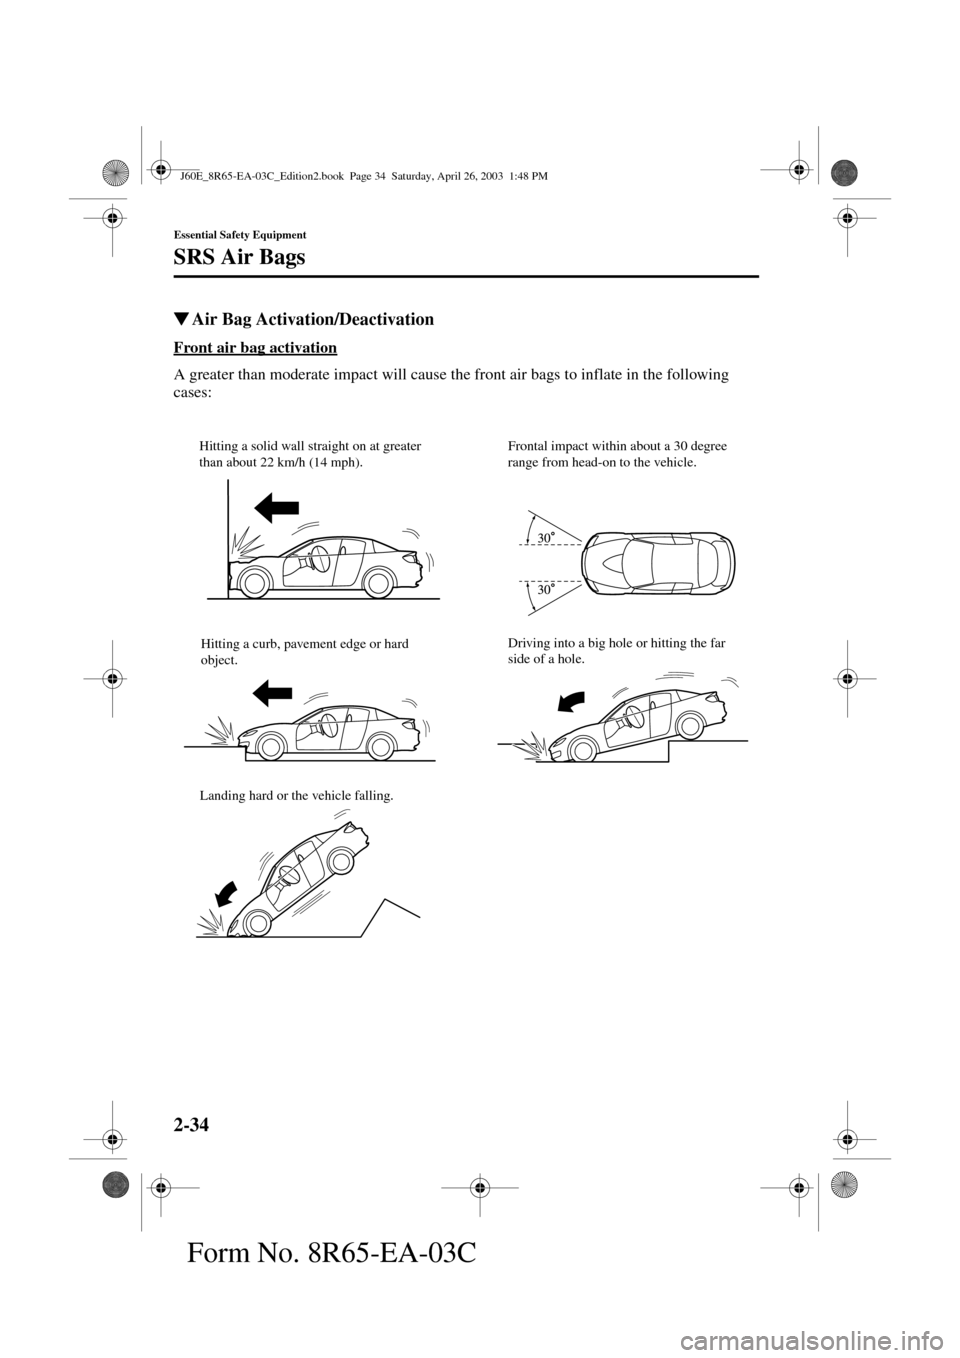 MAZDA MODEL RX 8 2004   (in English) Service Manual 2-34
Essential Safety Equipment
SRS Air Bags
Form No. 8R65-EA-03C
Air Bag Activation/Deactivation
Front air bag activation
A greater than moderate impact will cause the front air bags to inflate in t